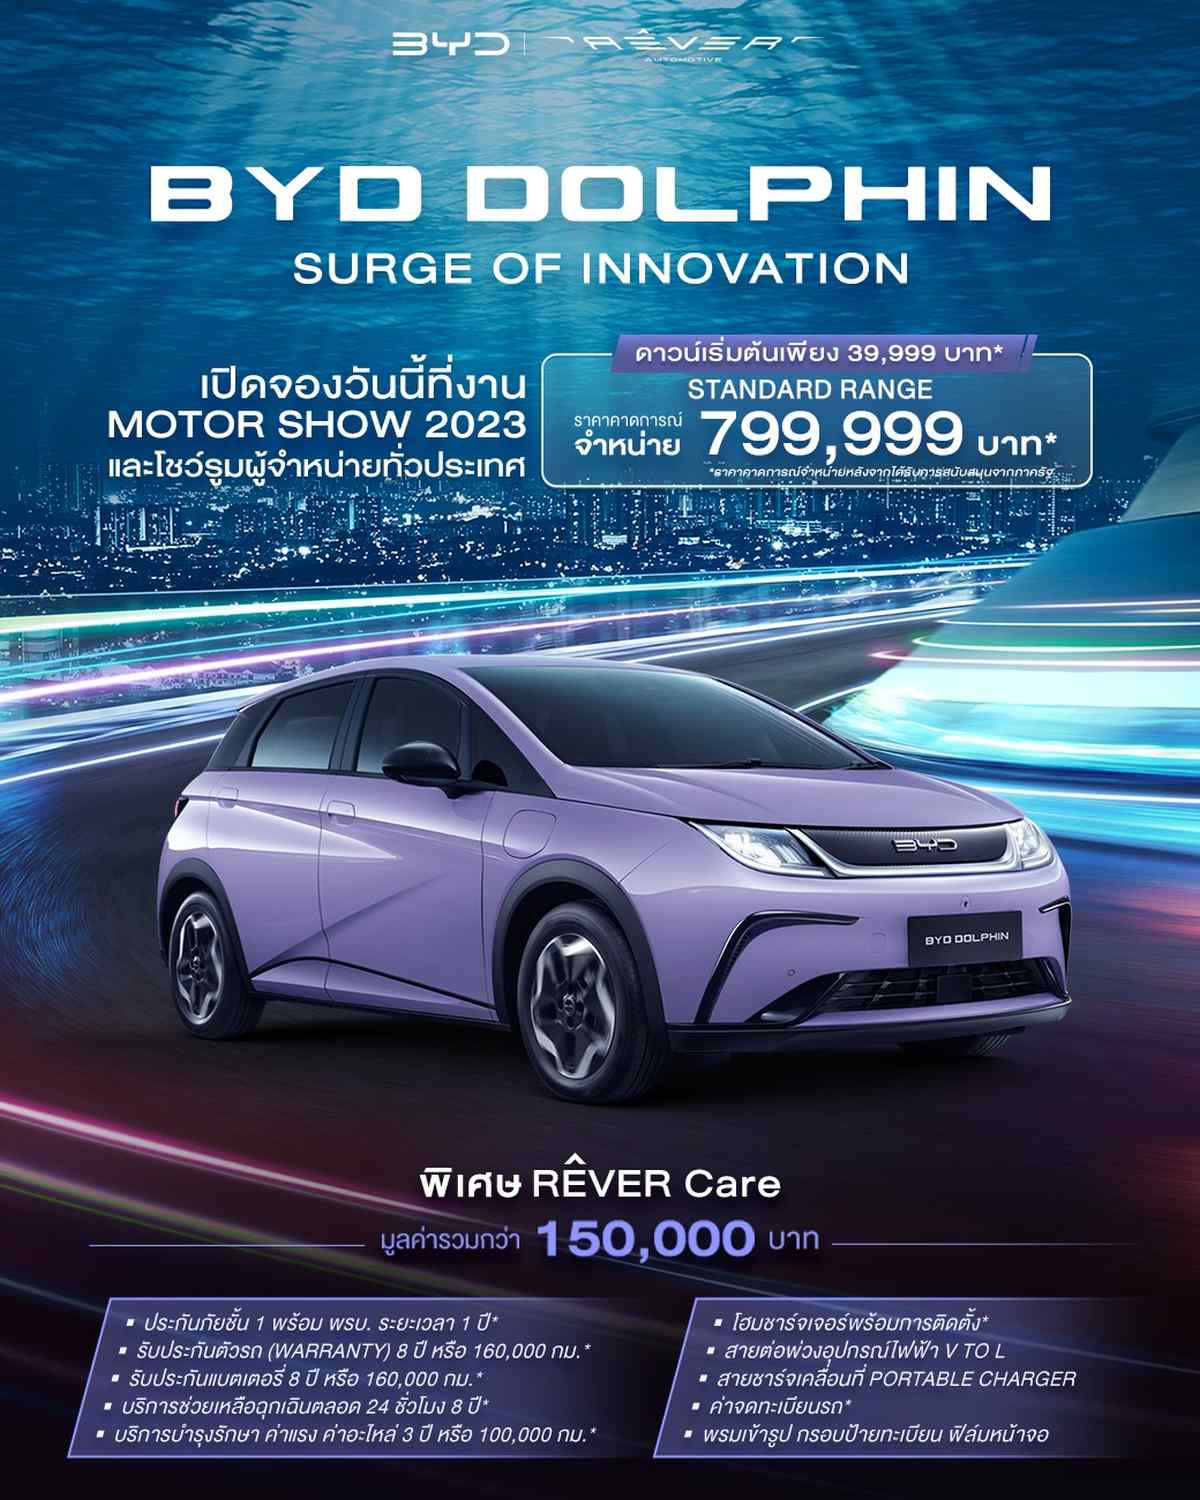 BYD Dolphin Thailand Launch Poster